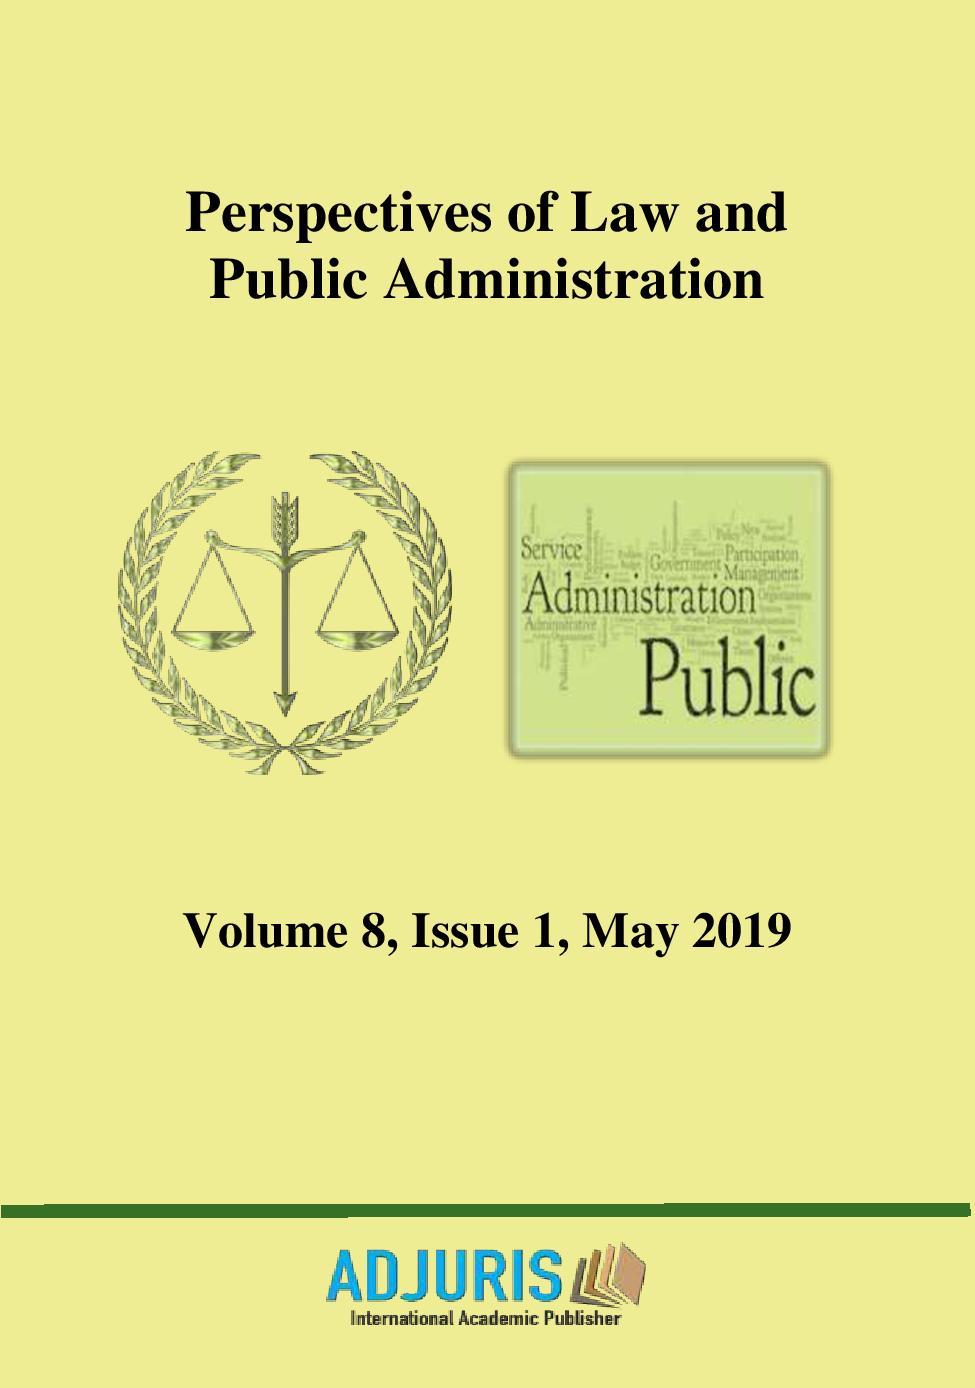 POLISH, GERMAN AND FRENCH EXAMPLES OF THE APPLICATION OF ACTIO PAULIANA TO TAX OBLIGATIONS. REFLECTIONS ON THE SENSE OF THE DIVISION INTO PUBLIC AND PRIVATE LAW